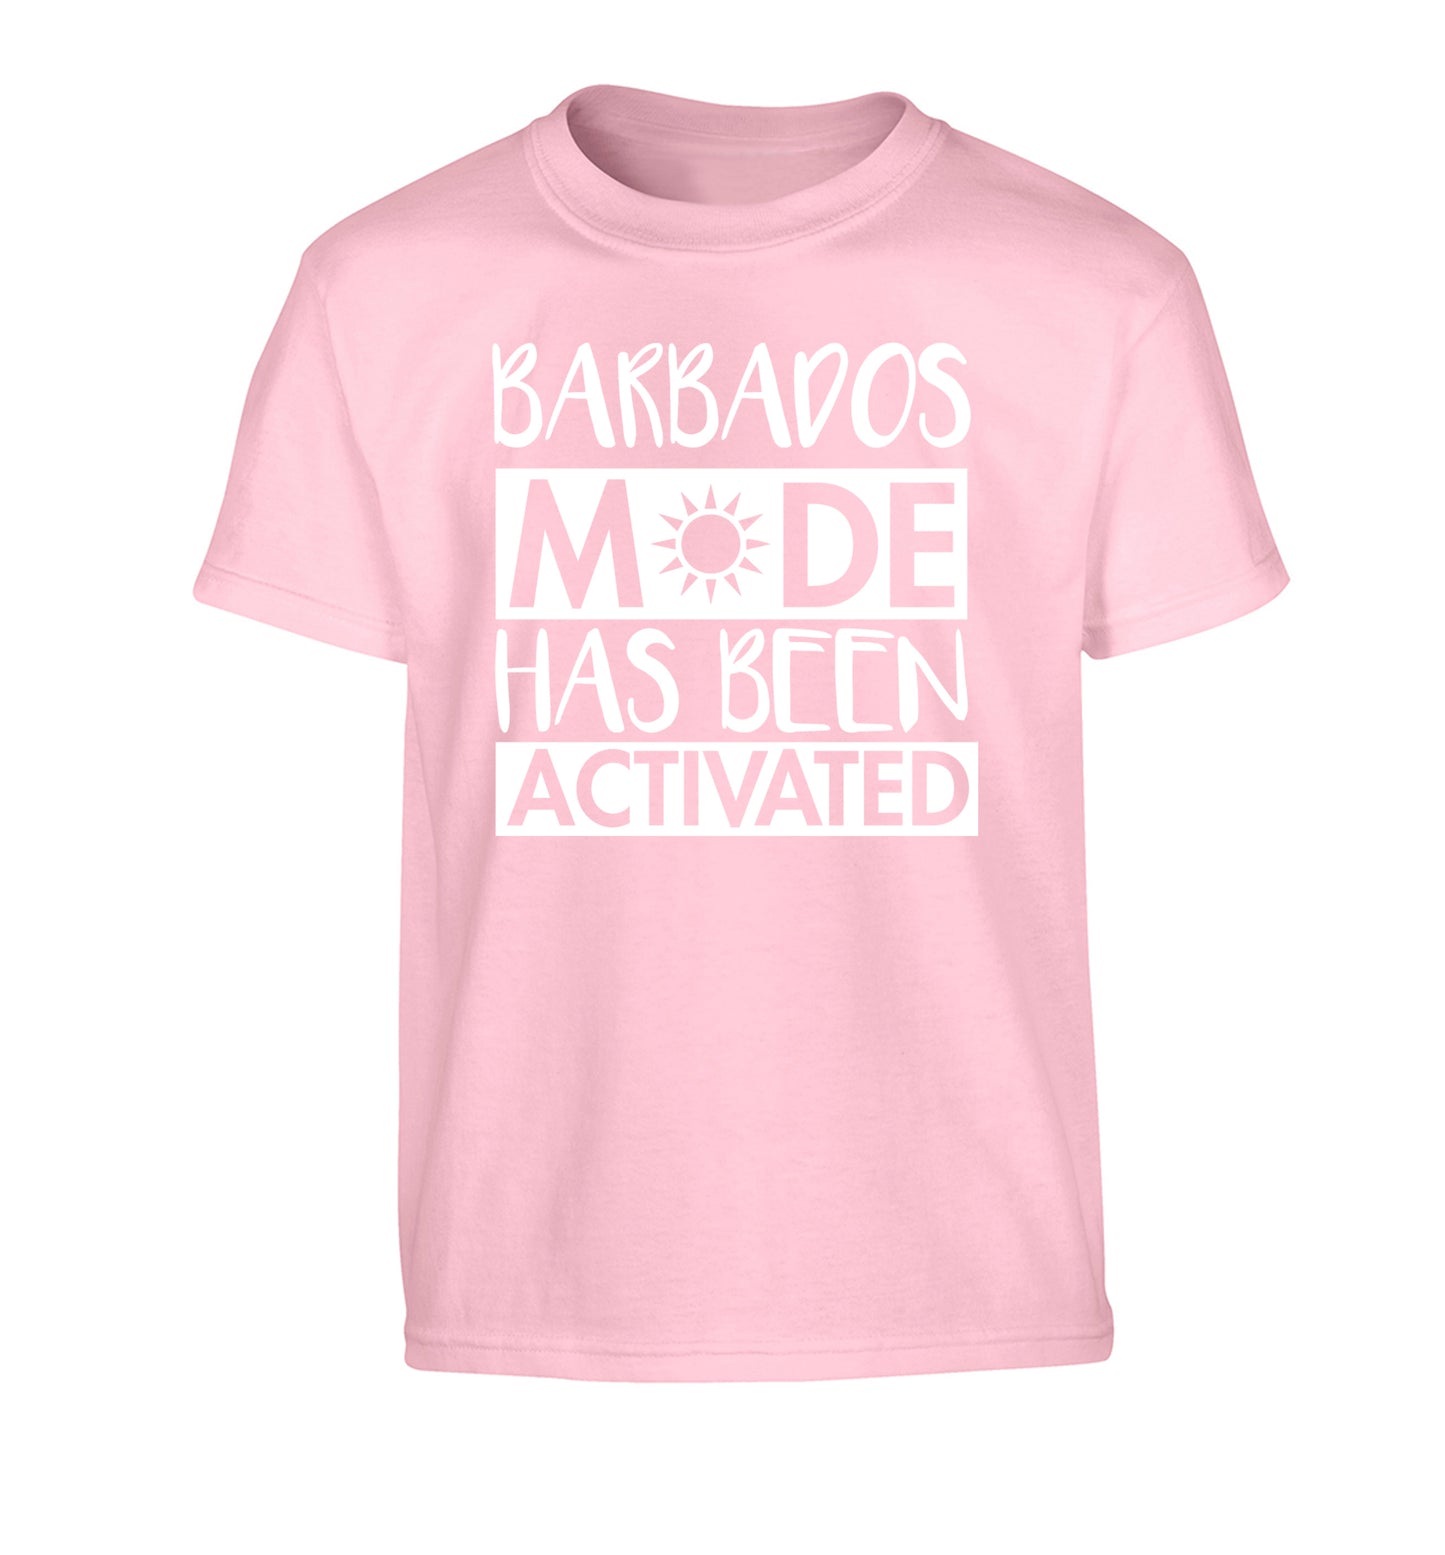 Barbados mode has been activated Children's light pink Tshirt 12-13 Years